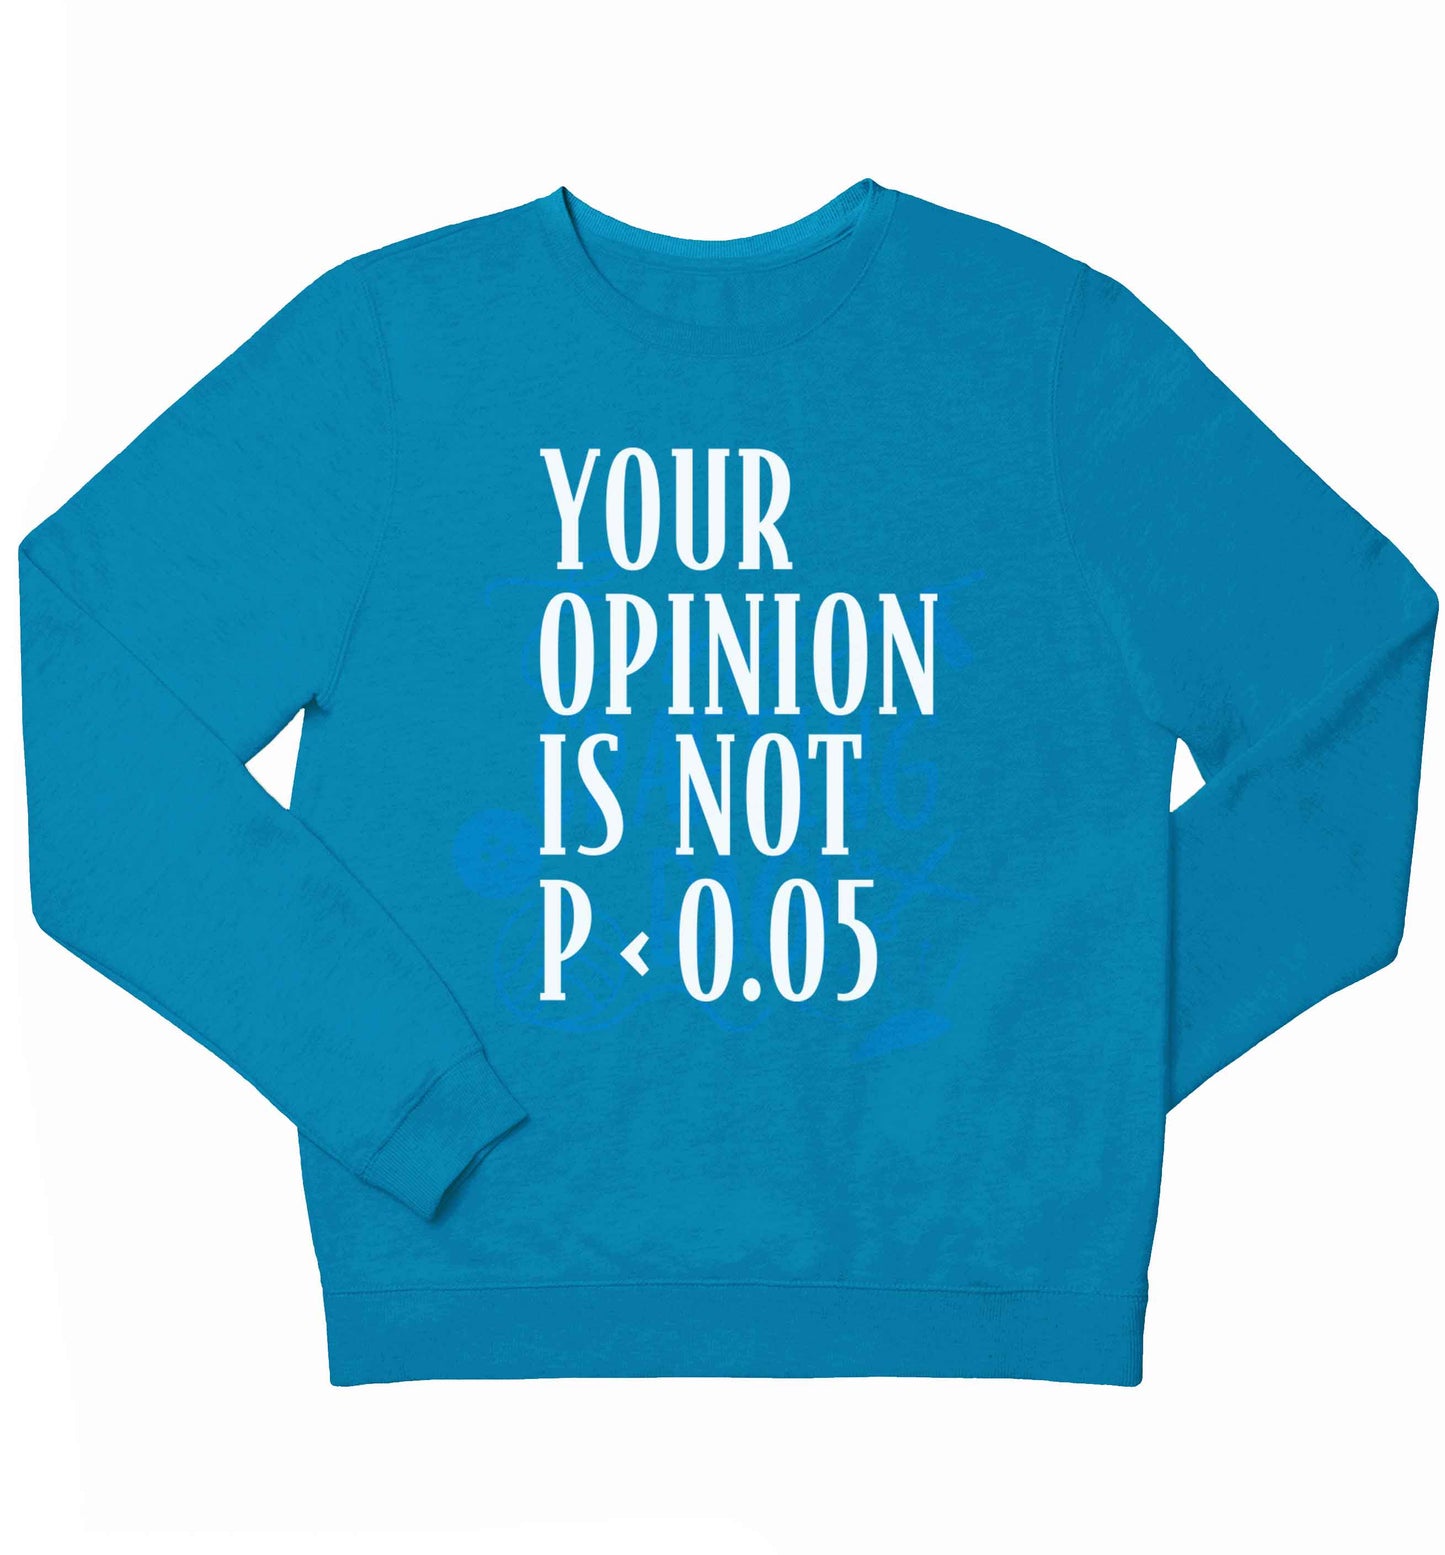 Your opinion is not P < 0.05children's blue sweater 12-13 Years